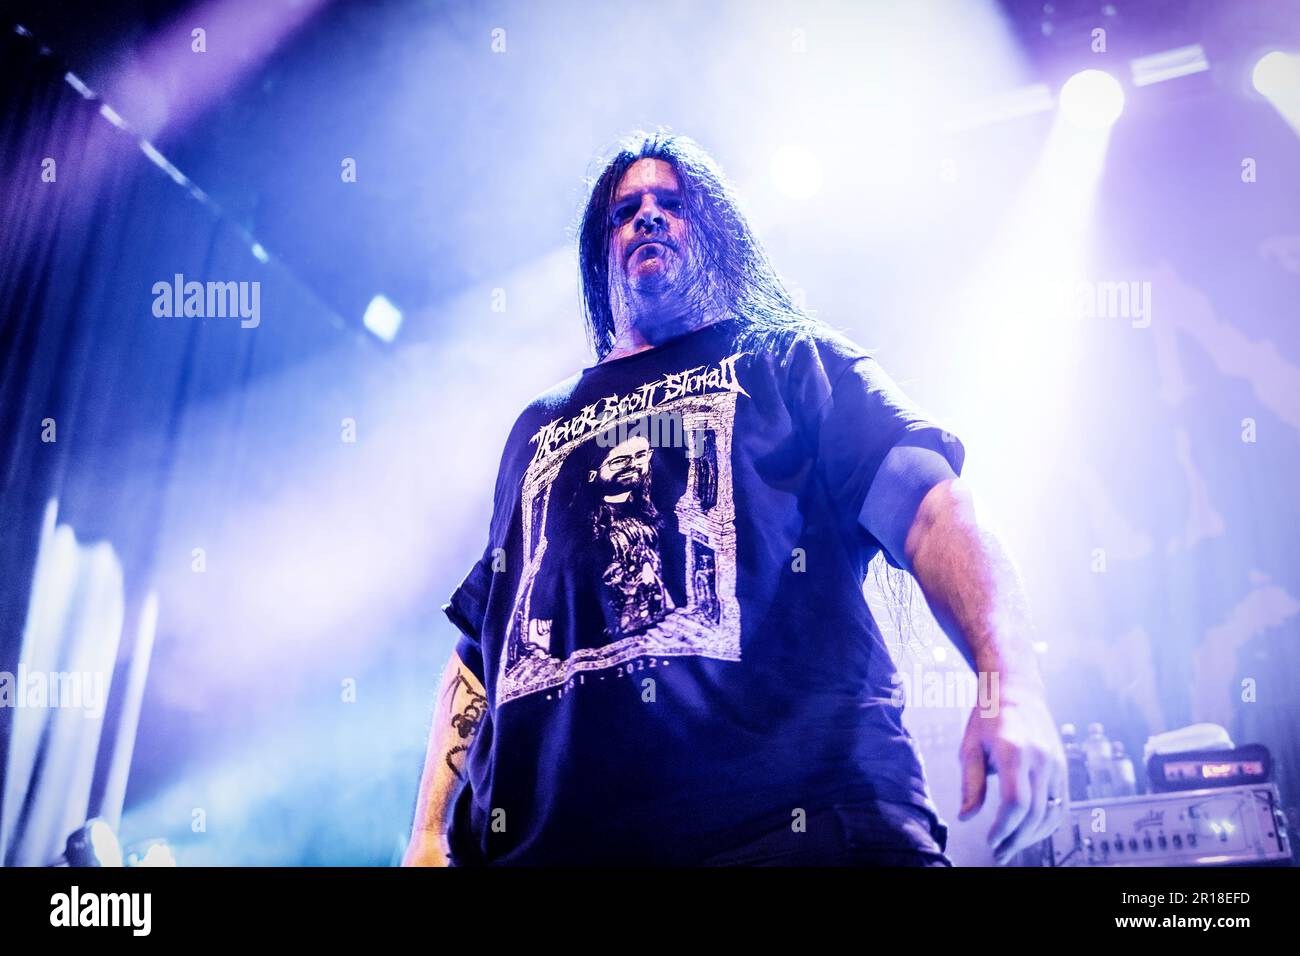 Oslo, Norway. 06th, April 2023. The American death metal band Cannibal Corpse performs a live concert at Rockefeller during the Norwegian metal festival Inferno Metal Festival 2023 in Oslo. Here vocalist George Fisher is seen live on stage. (Photo credit: Gonzales Photo - Terje Dokken). Stock Photo